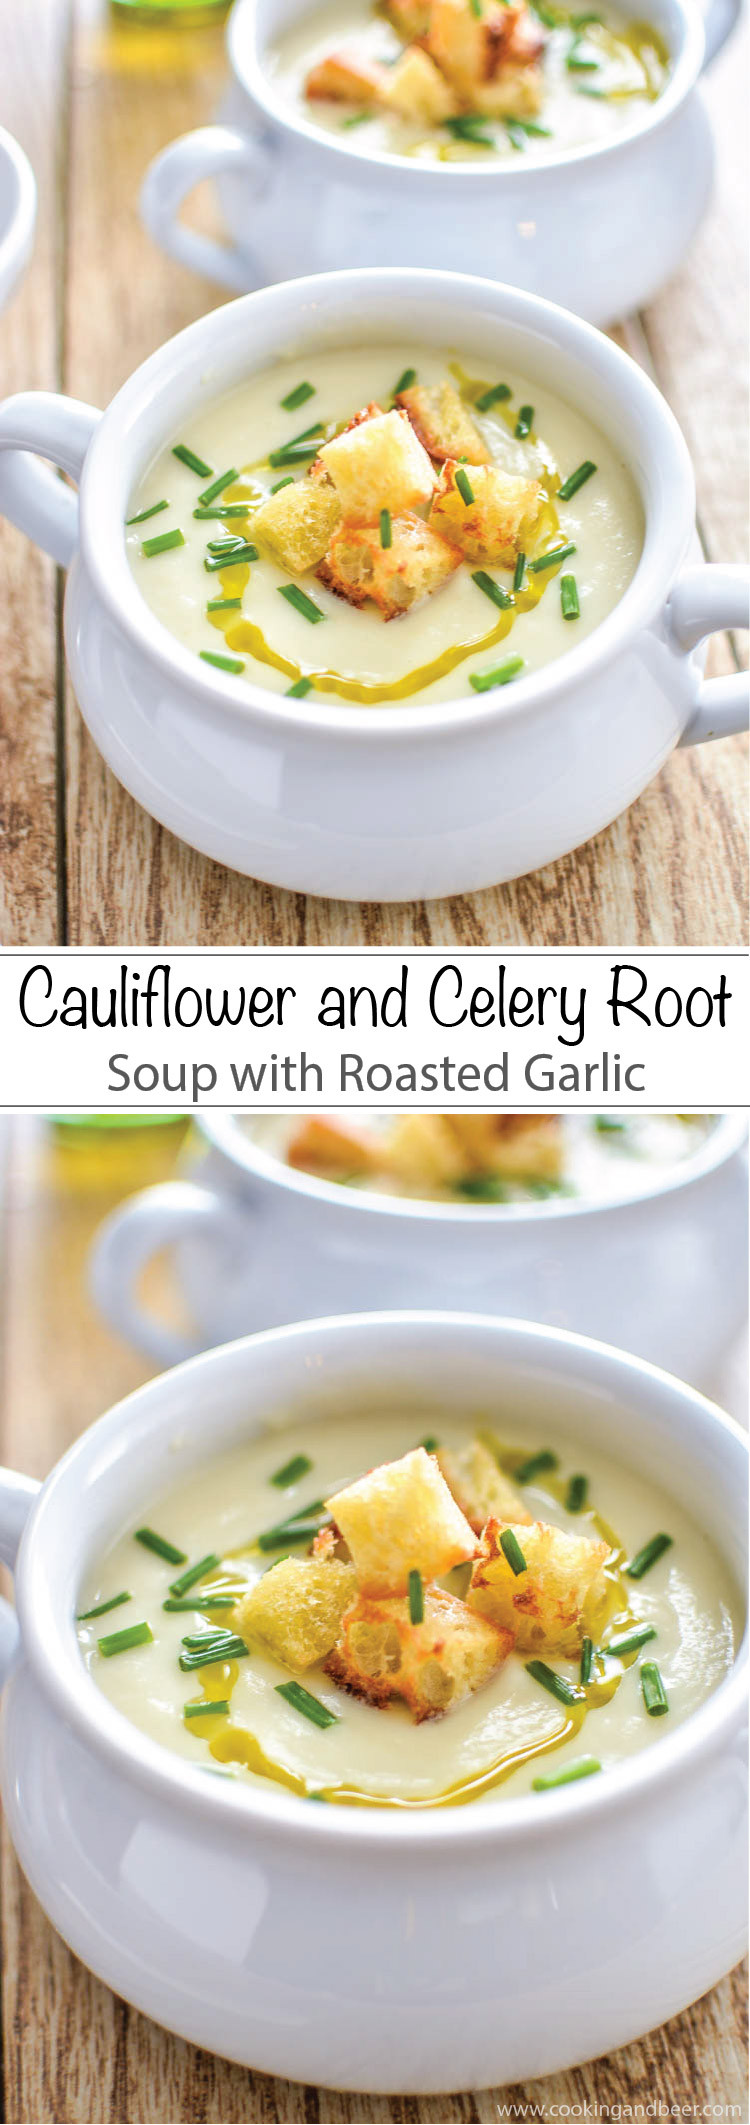 Cauliflower Soup Ina Garten
 Cauliflower and Celery Root Soup with Roasted